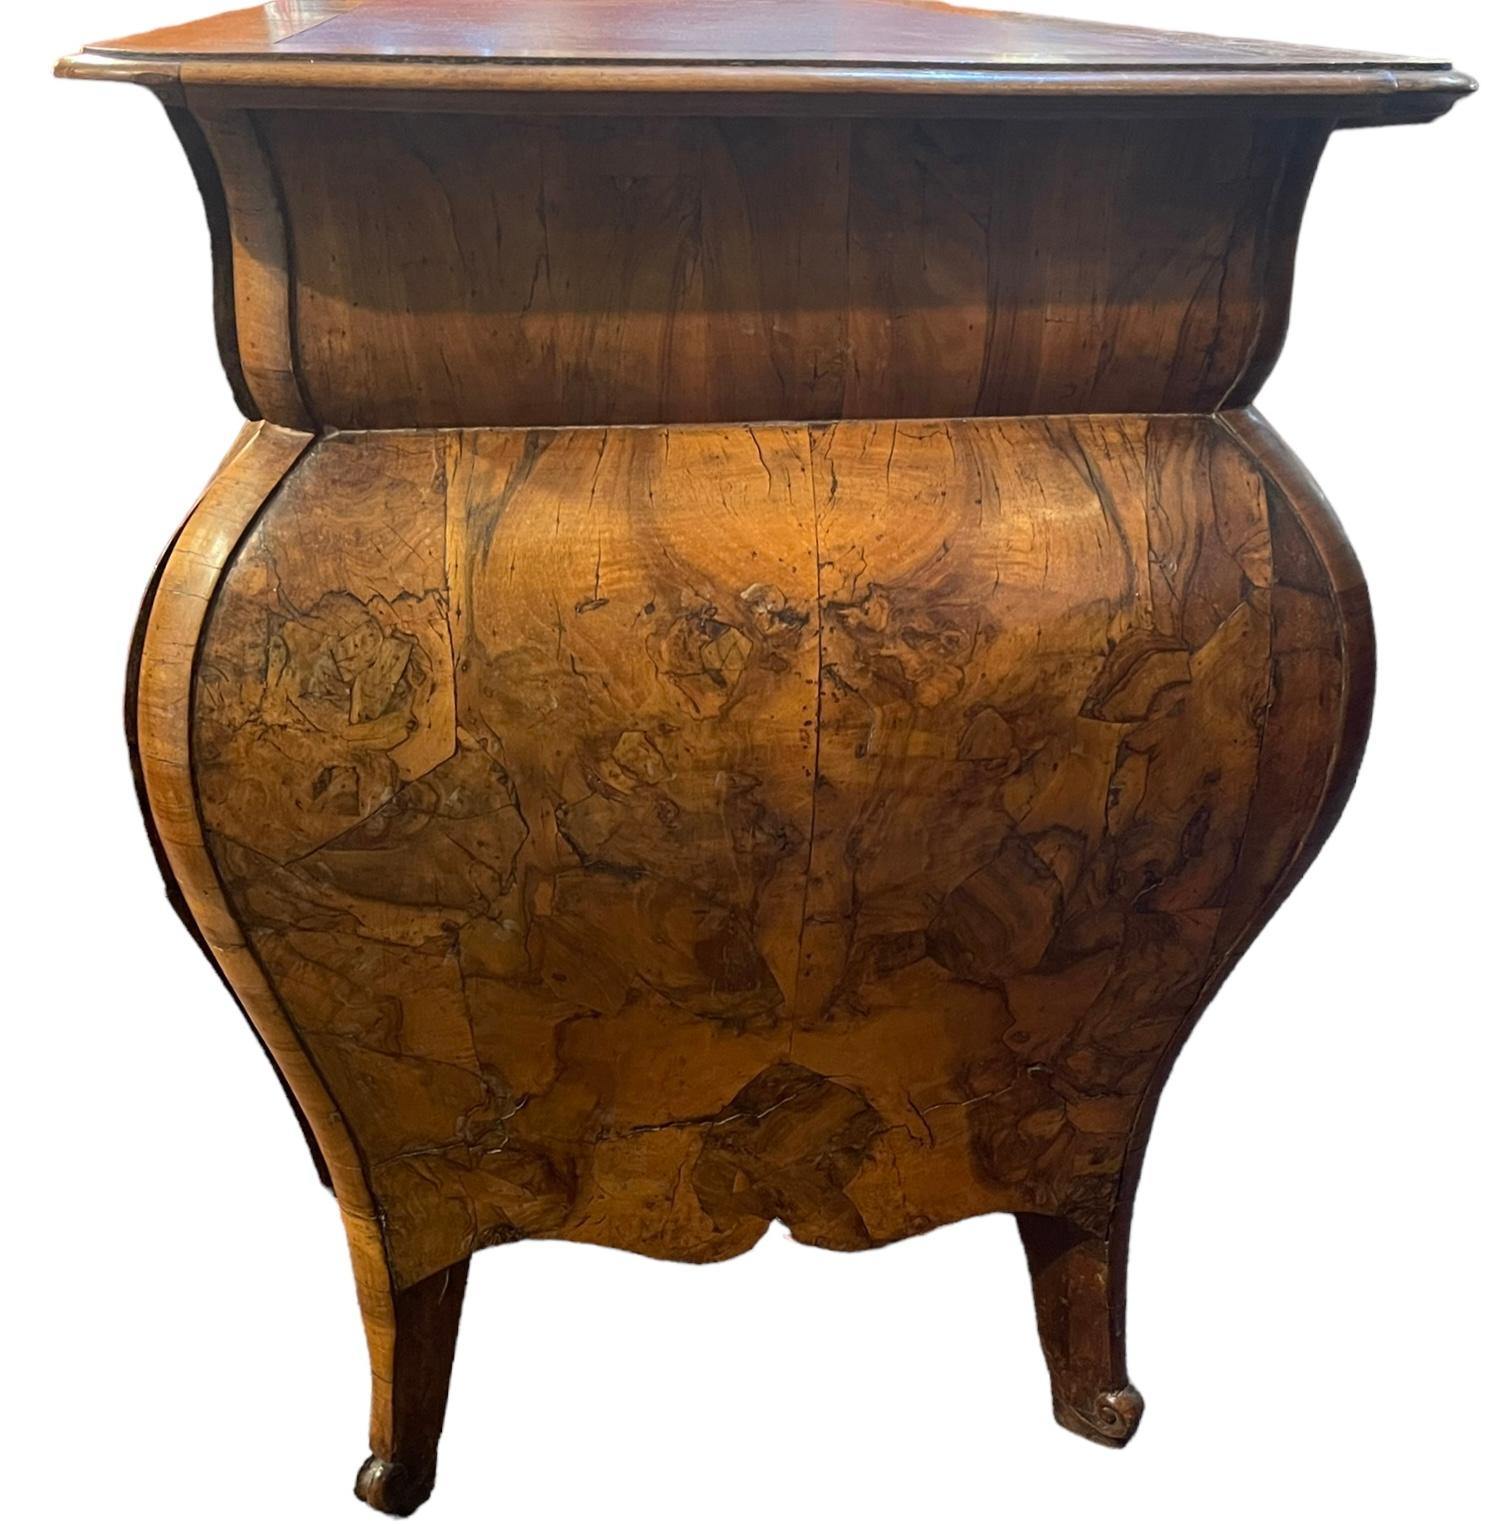 Hand-Crafted Desk, Lombard, Baroque, 19th century